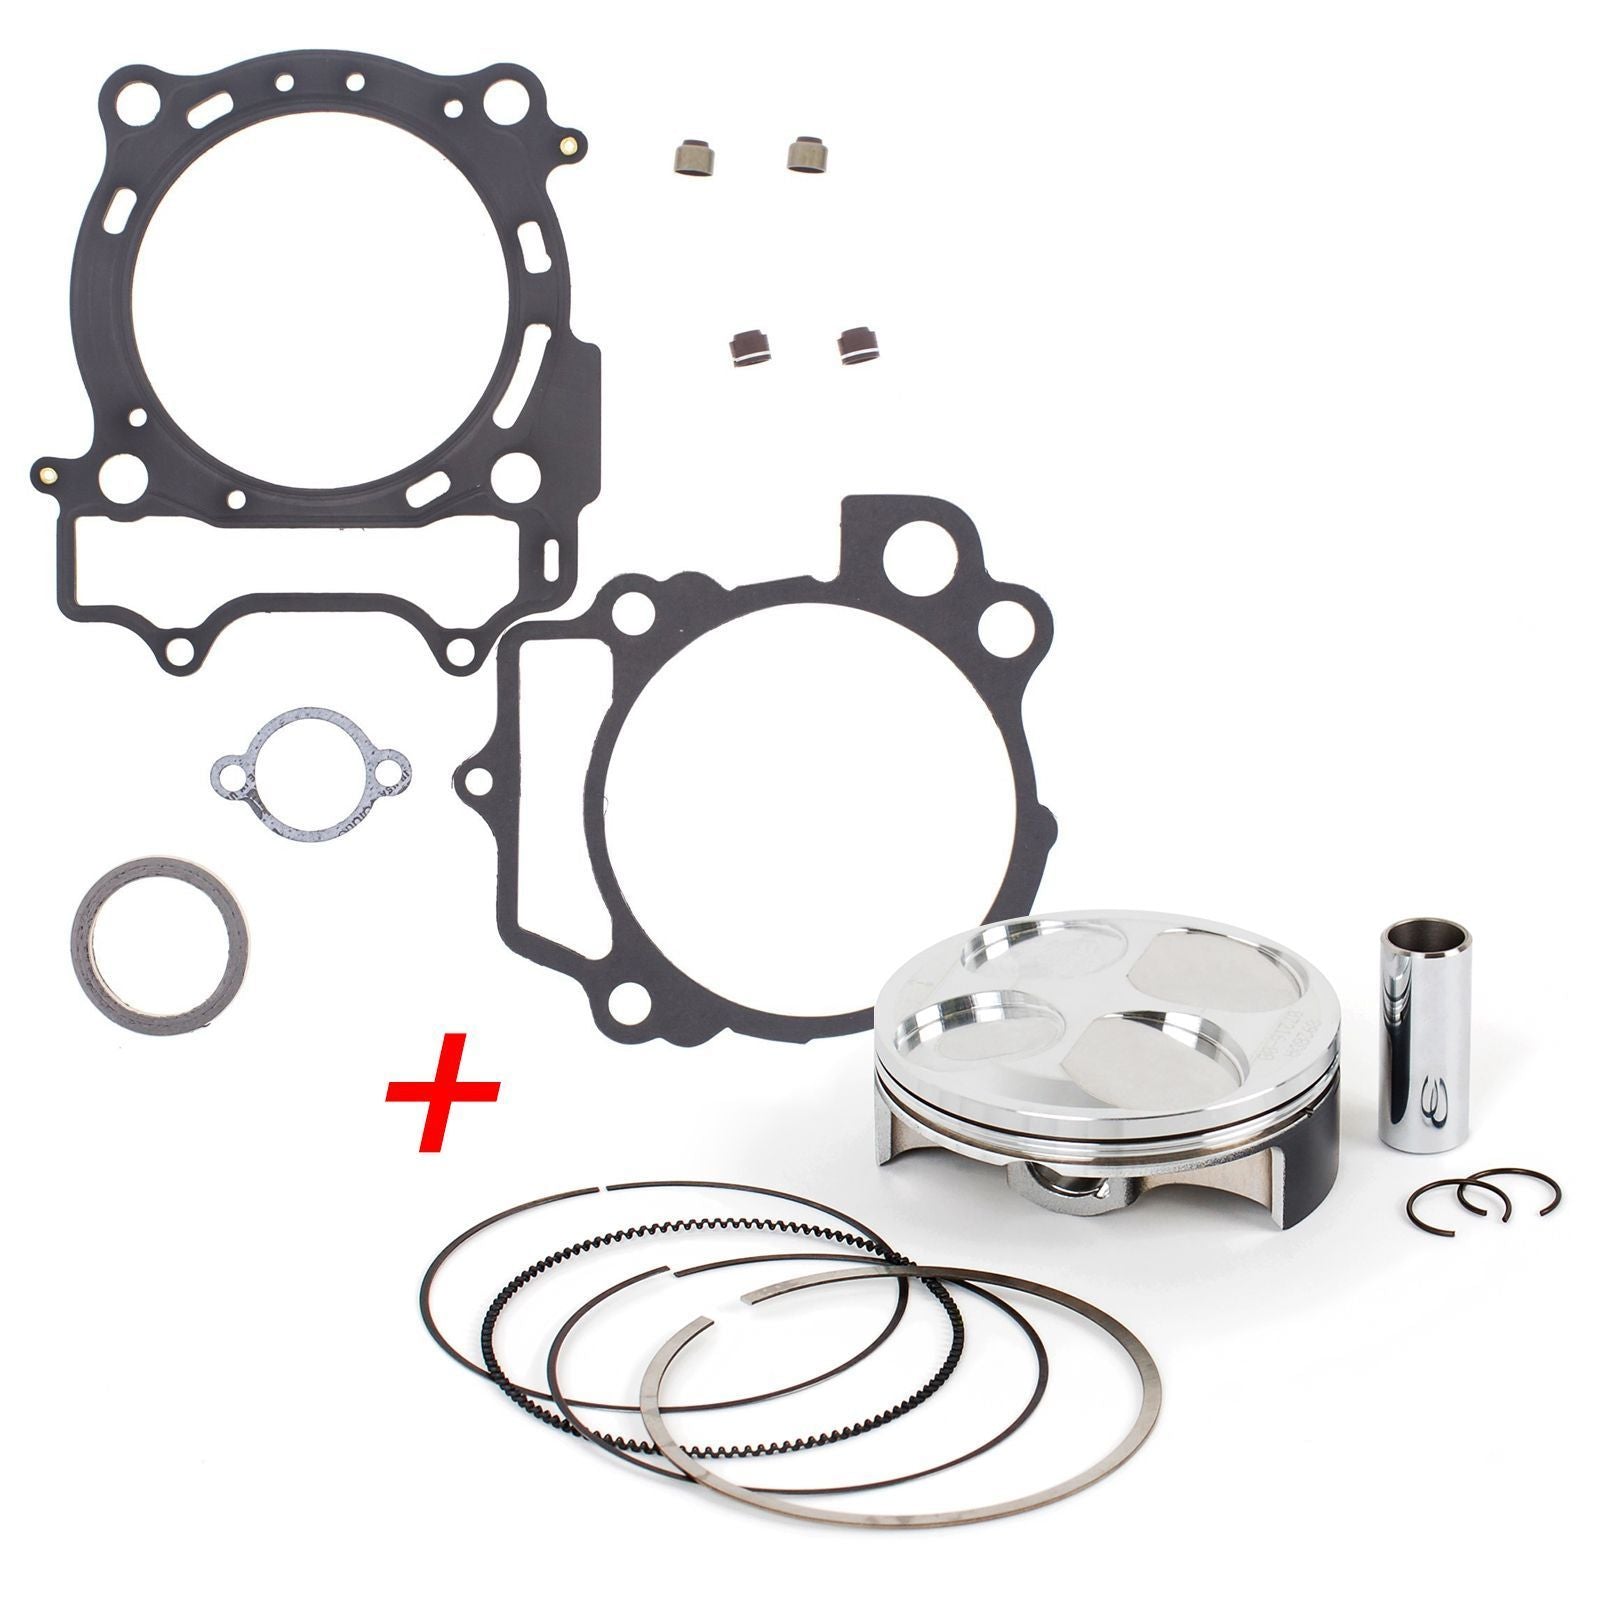 New Top End Rebuild Kit (B) For Yamaha WR426F 2001-2002 #ERTY032B